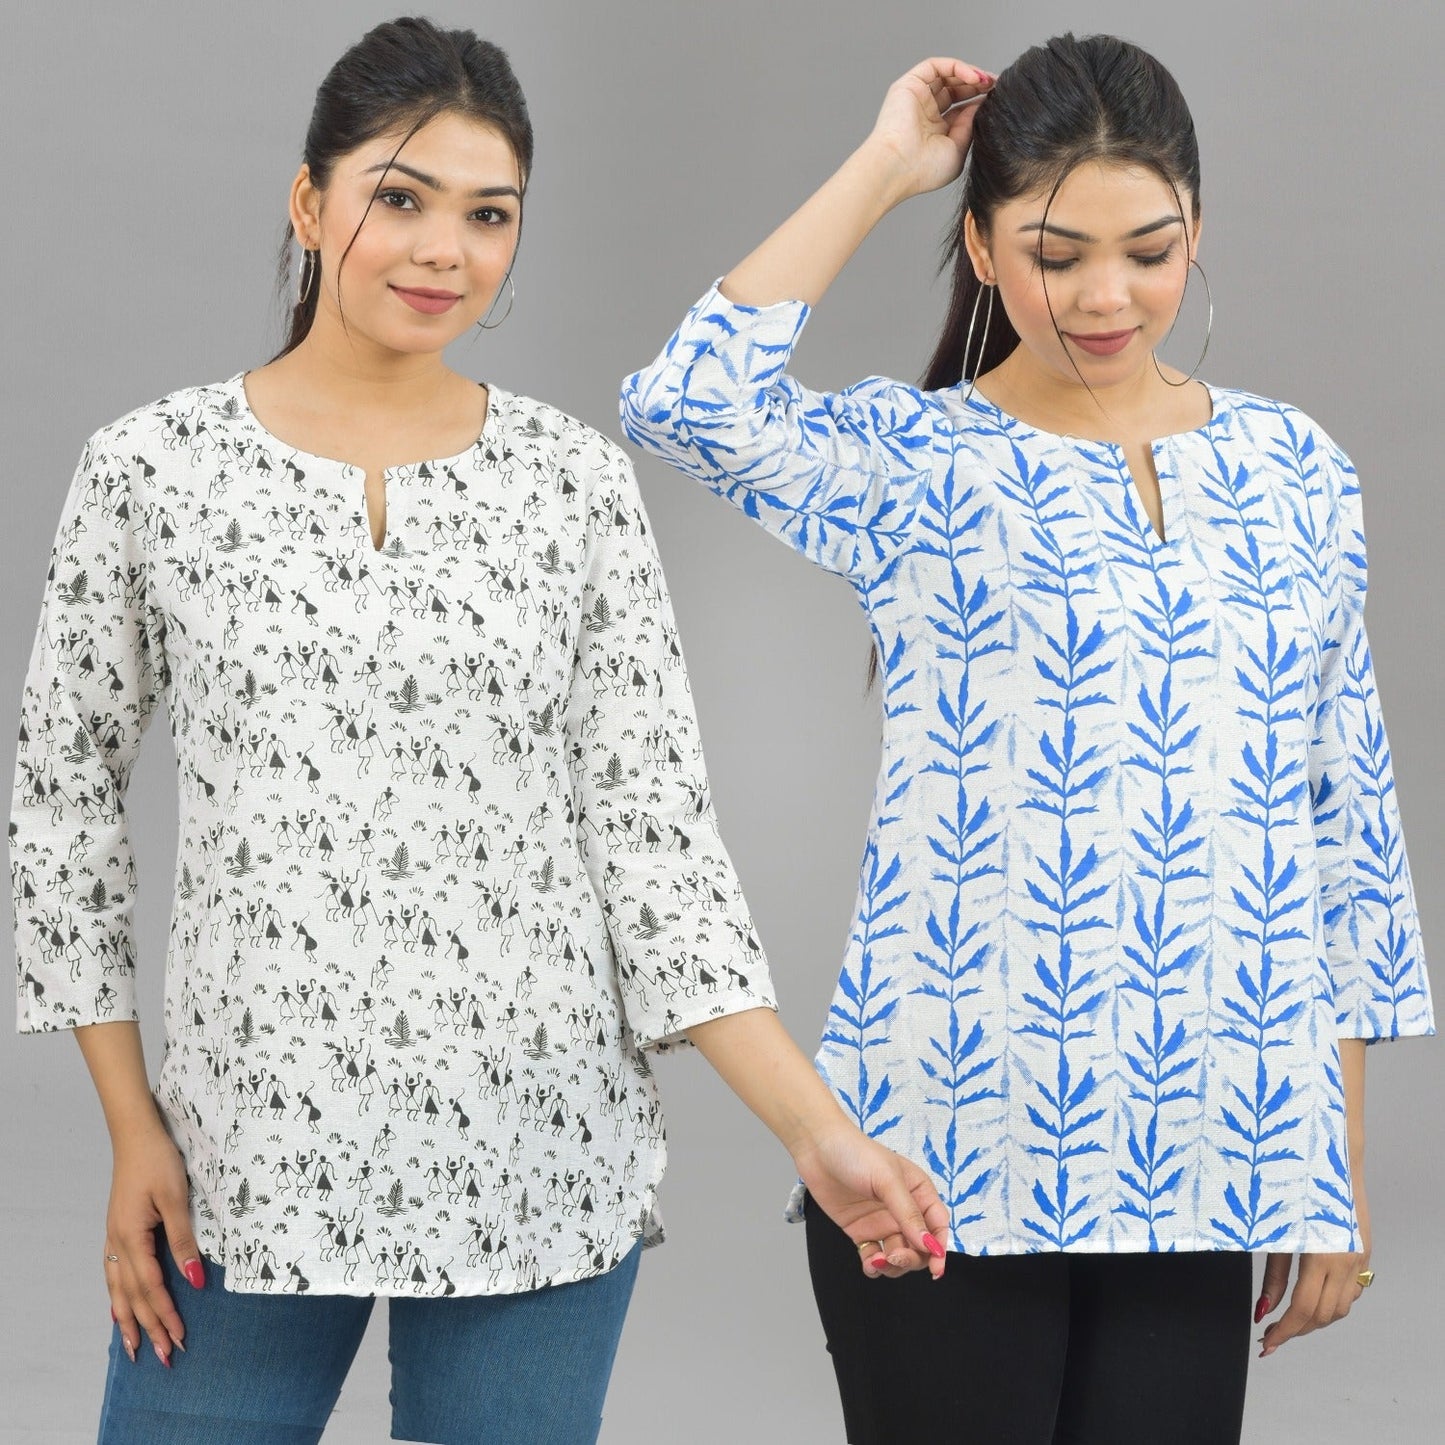 Pack Of 2 Womens Regular Fit Black Vector And Blue Leaf Printed Tops Combo